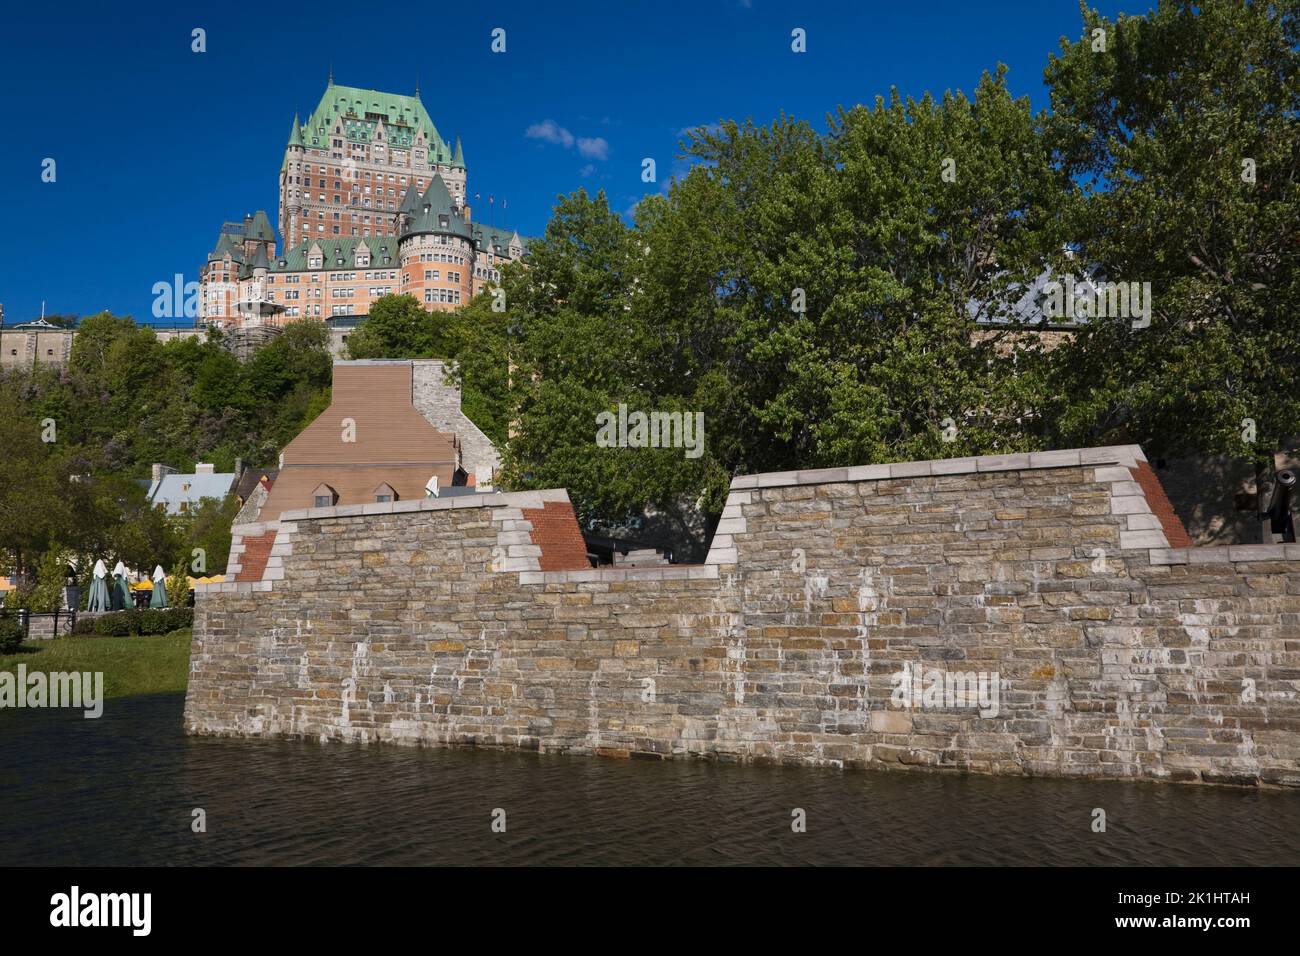 Old Fortification wall and Chateau Frontenac, Quebec City, Quebec, Canada Stock Photo